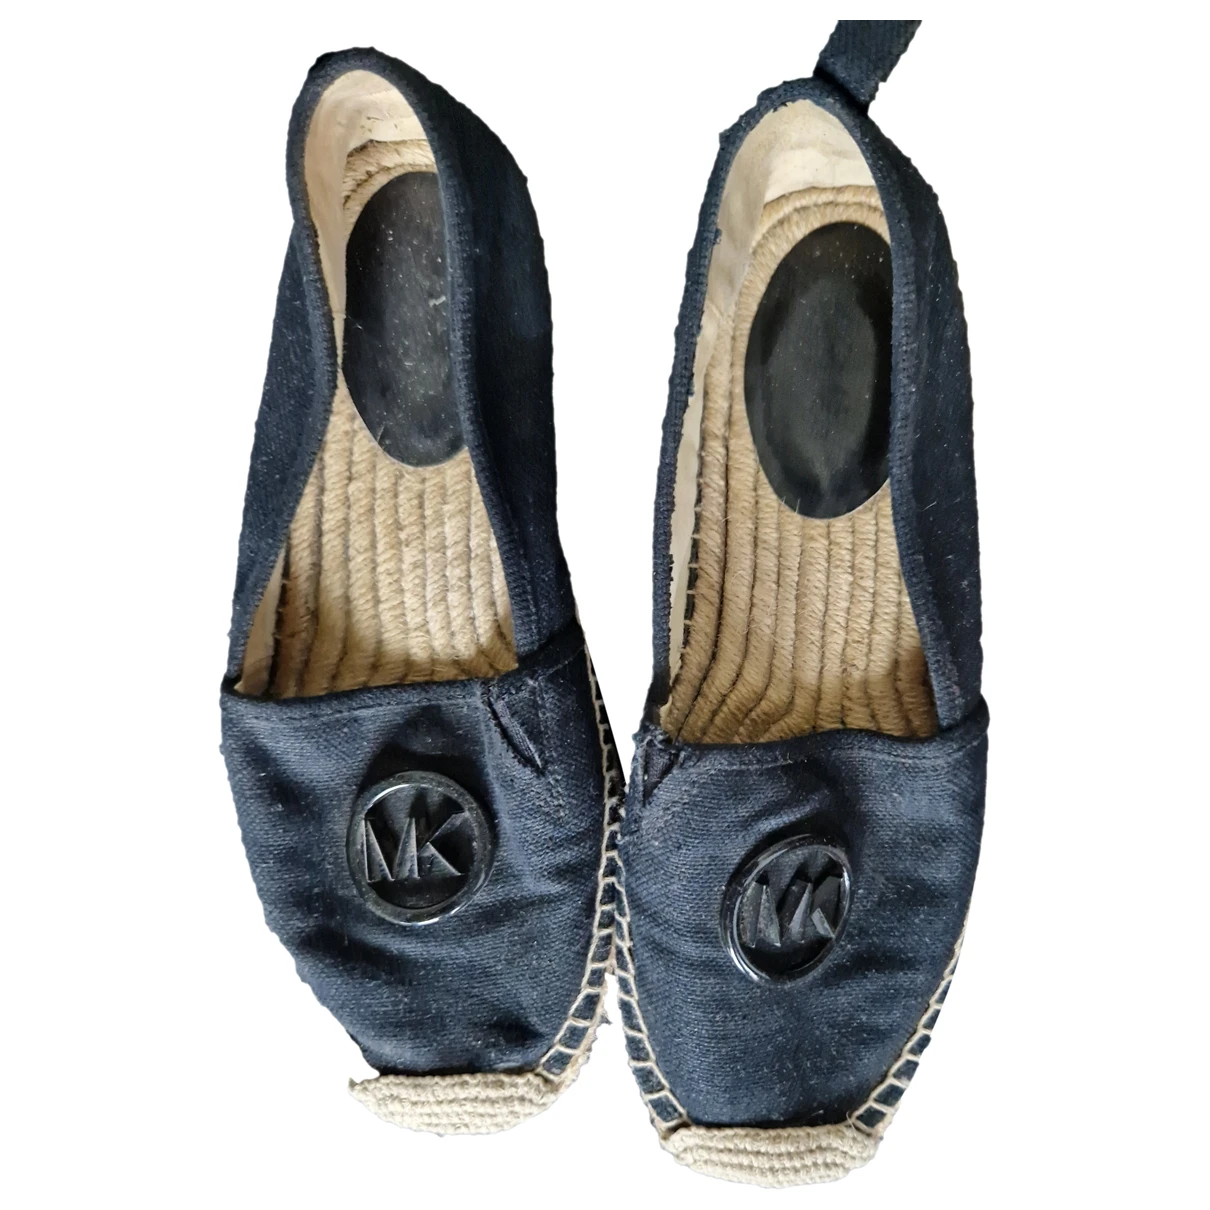 shoes Michael Kors espadrilles for Female Cloth 37 EU. Used condition